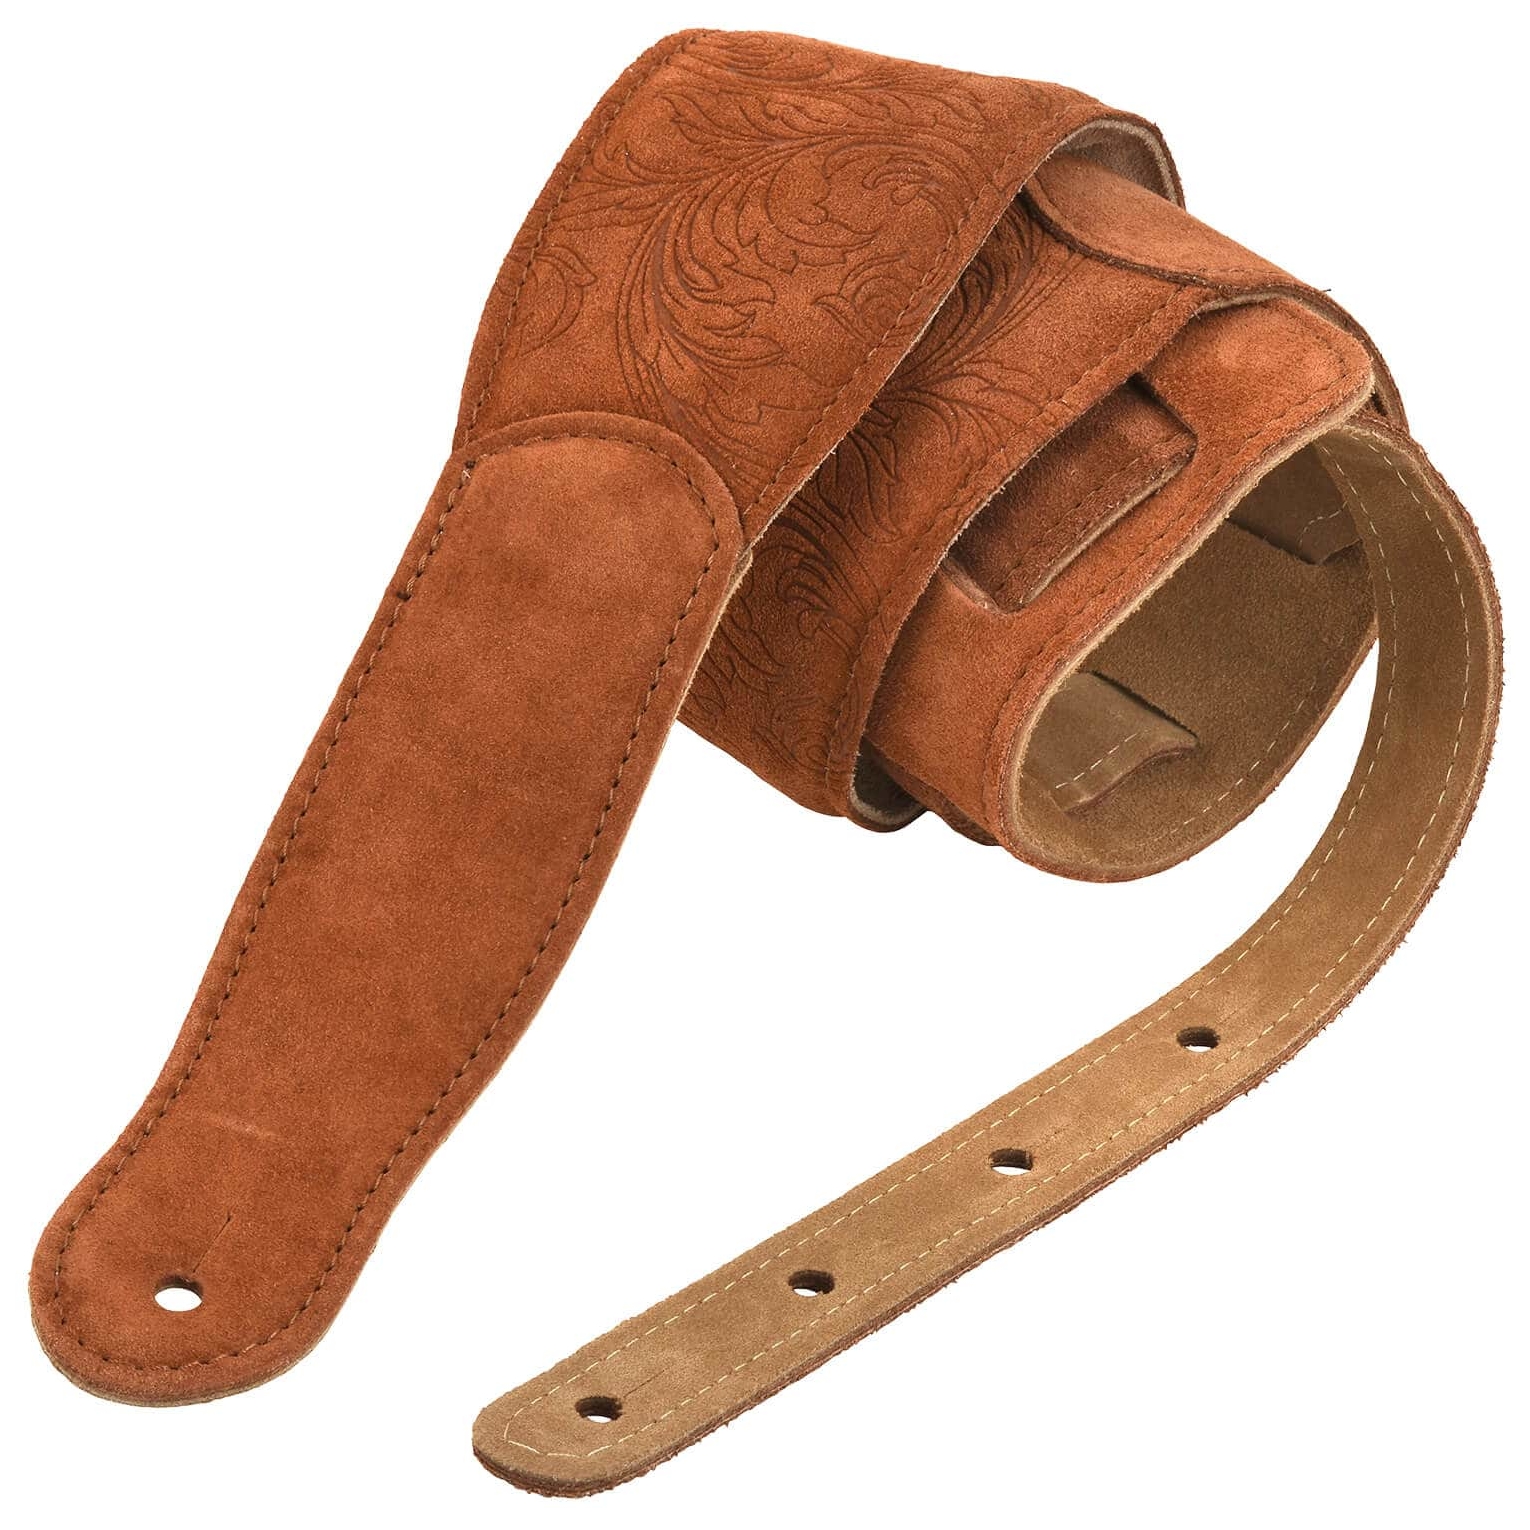 Session leather belt with floral brown padding